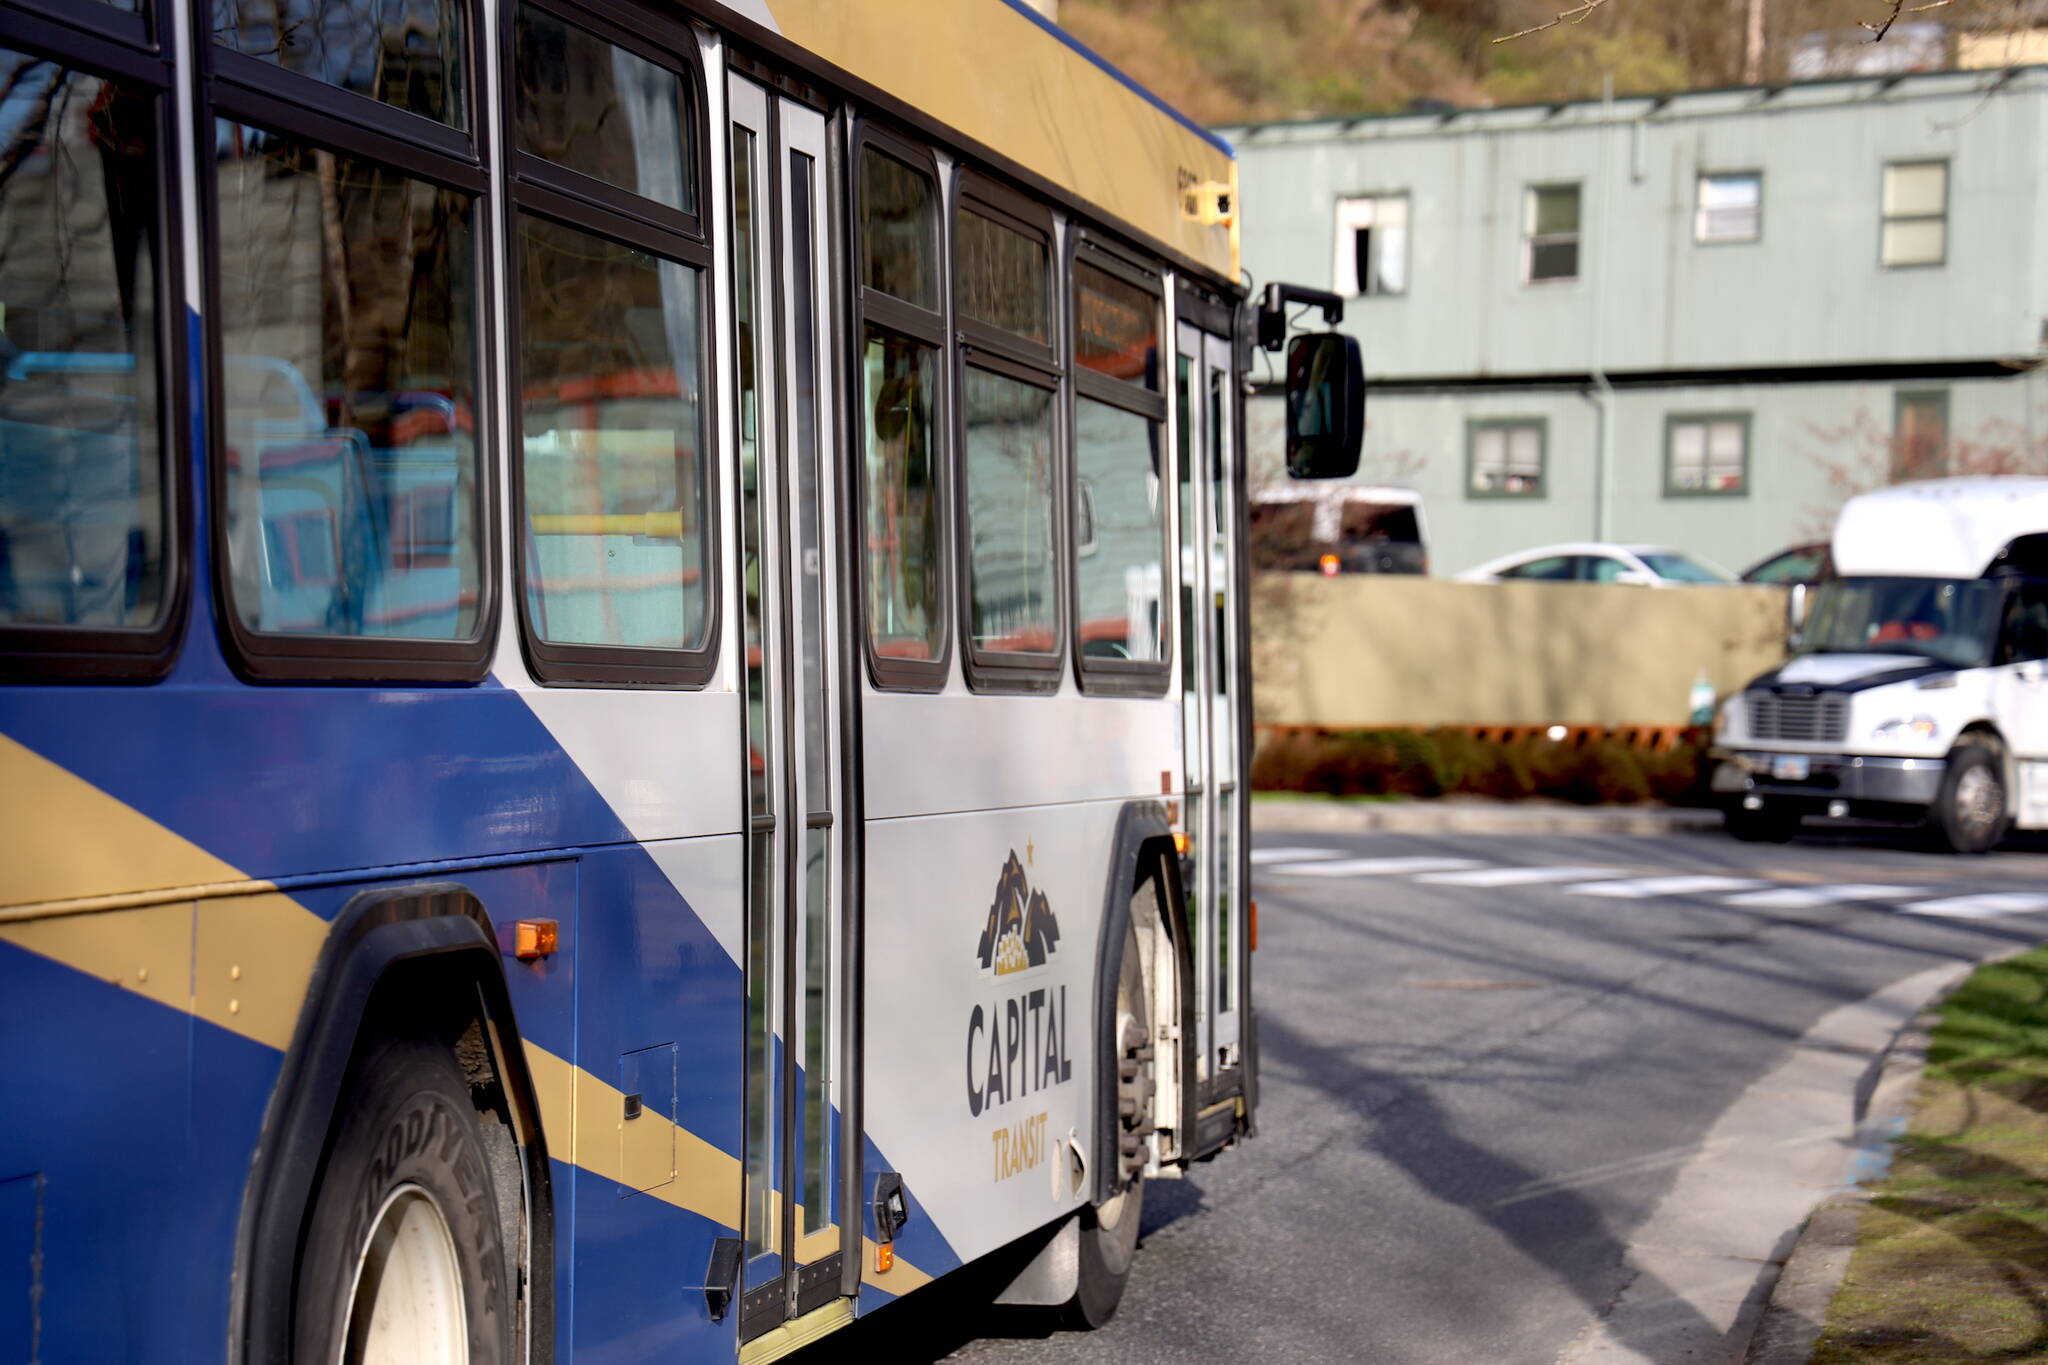 A Capital Transit bus makes its way downtown in August. The City and Borough of Juneau is considering a public transit bus to use as a winter warming shelter as it has received no bids to host a shelter. (Clarise Larson / Juneau Empire)